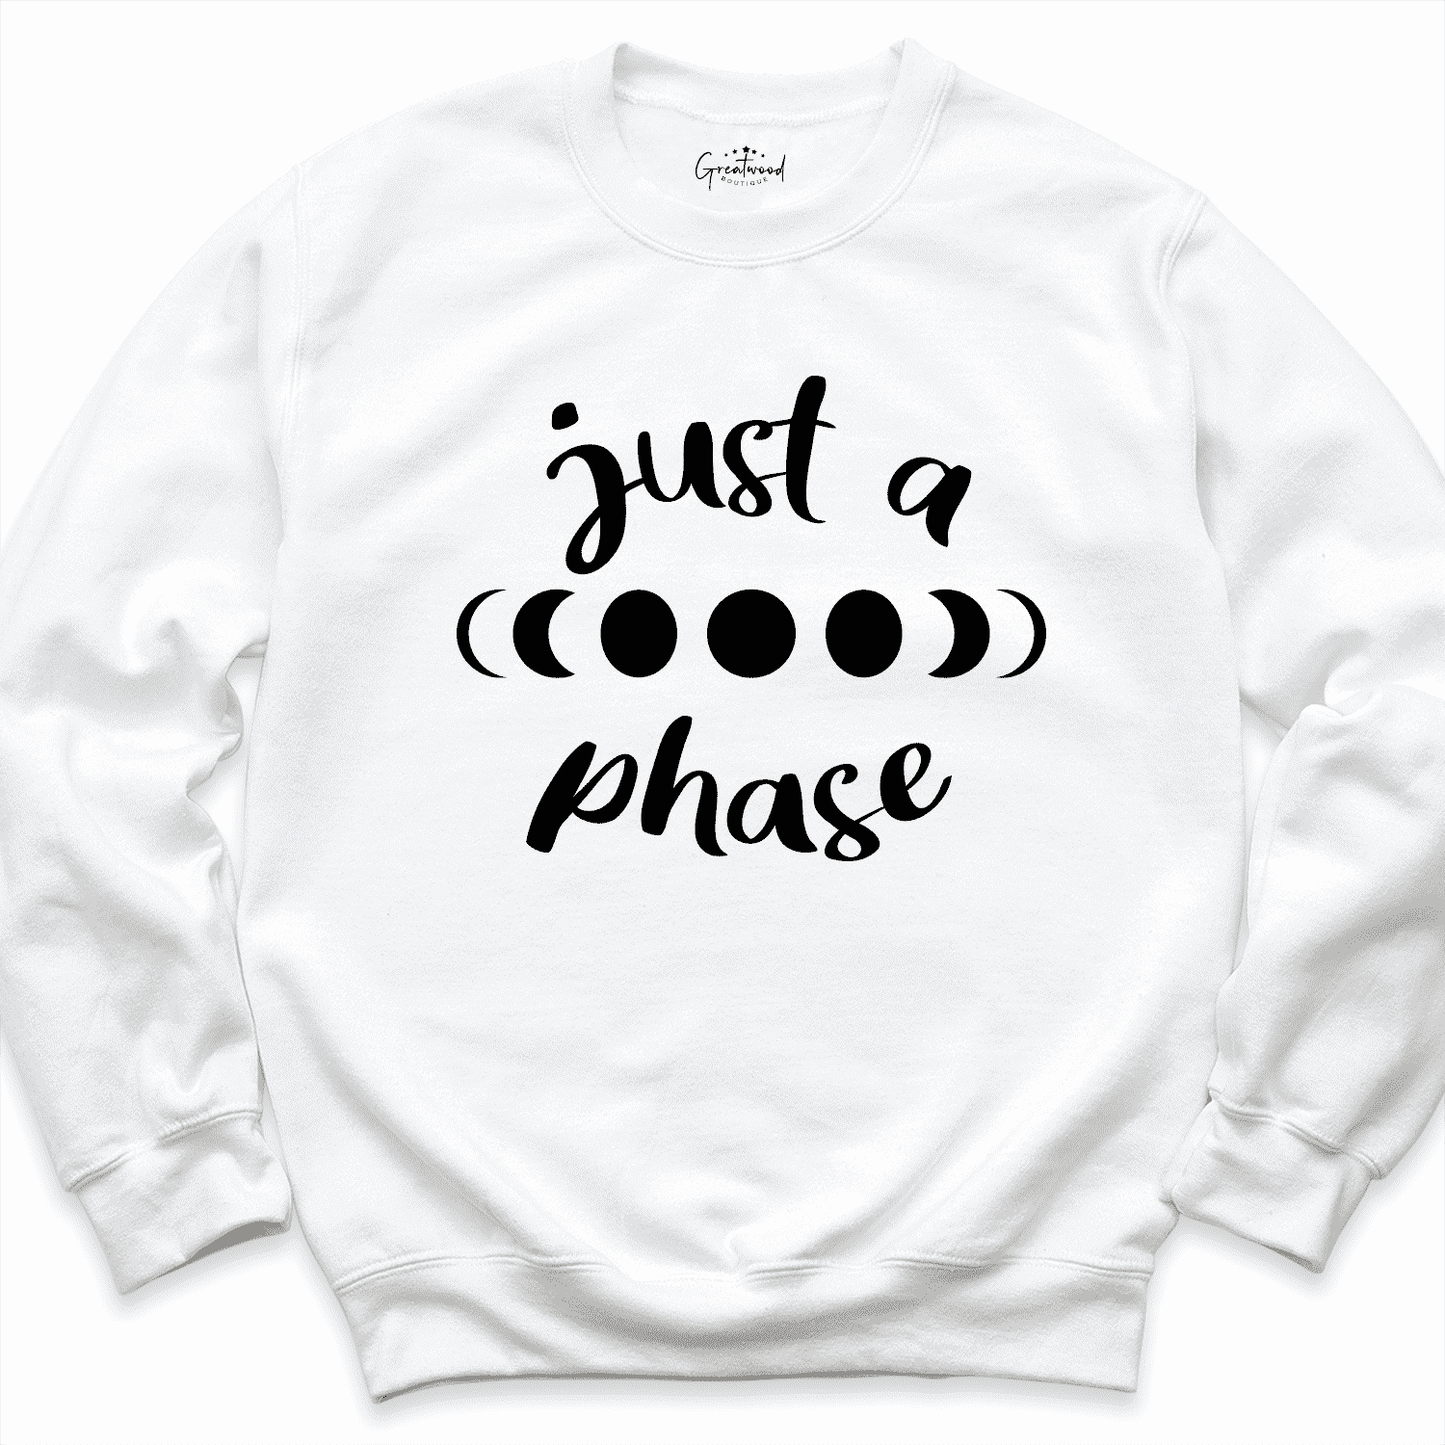 Just a Phase MOON Sweatshirt White - Greatwood Boutique